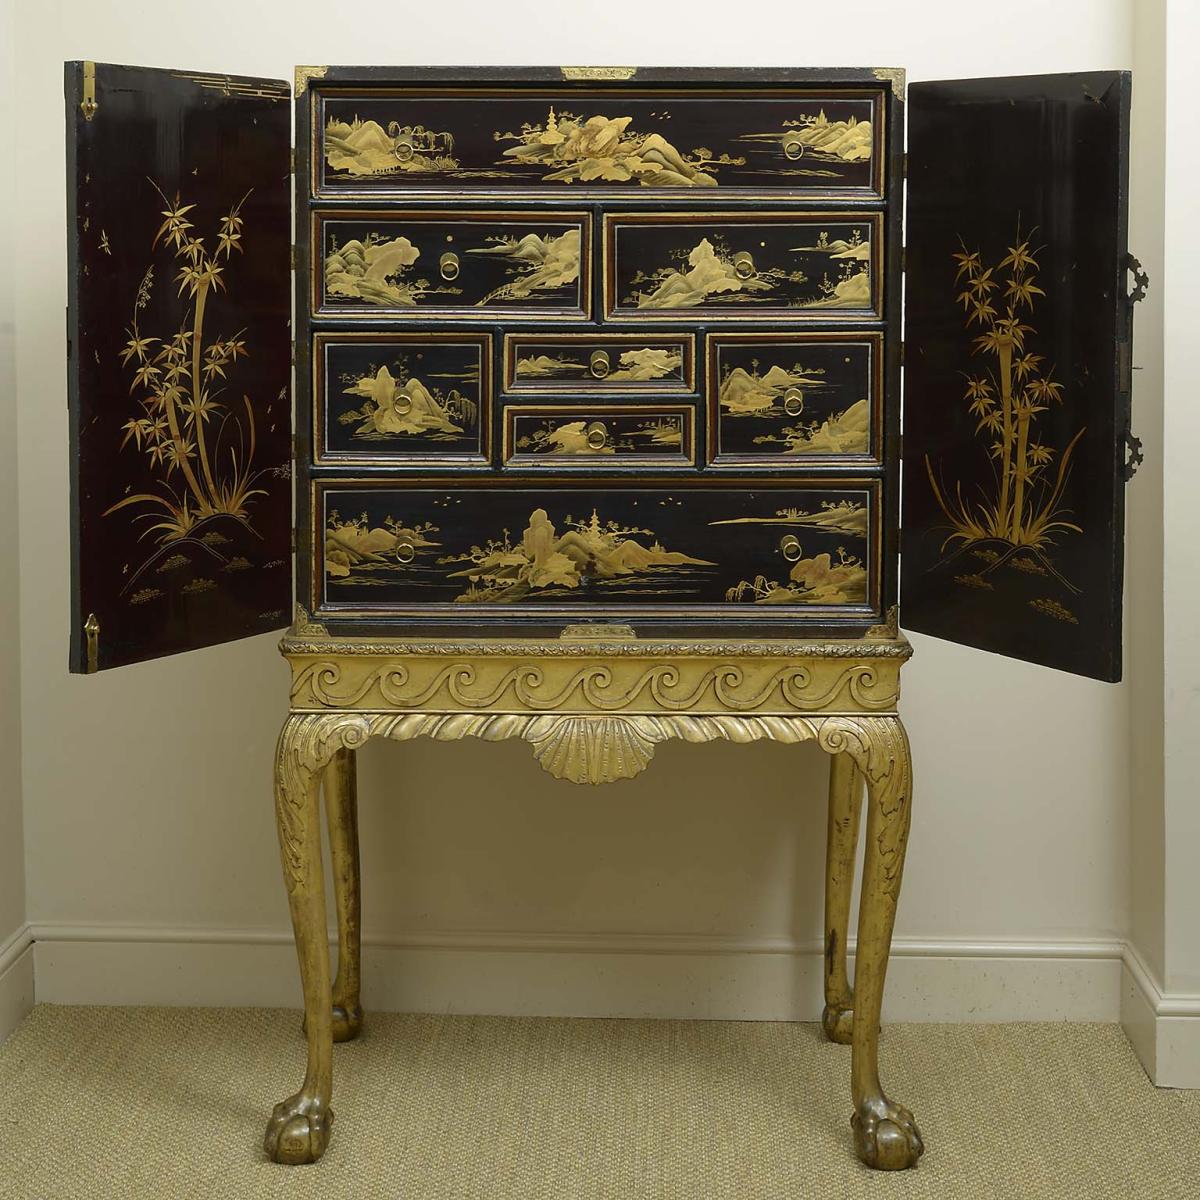 Chinese Export Lacquer Cabinet on Stand